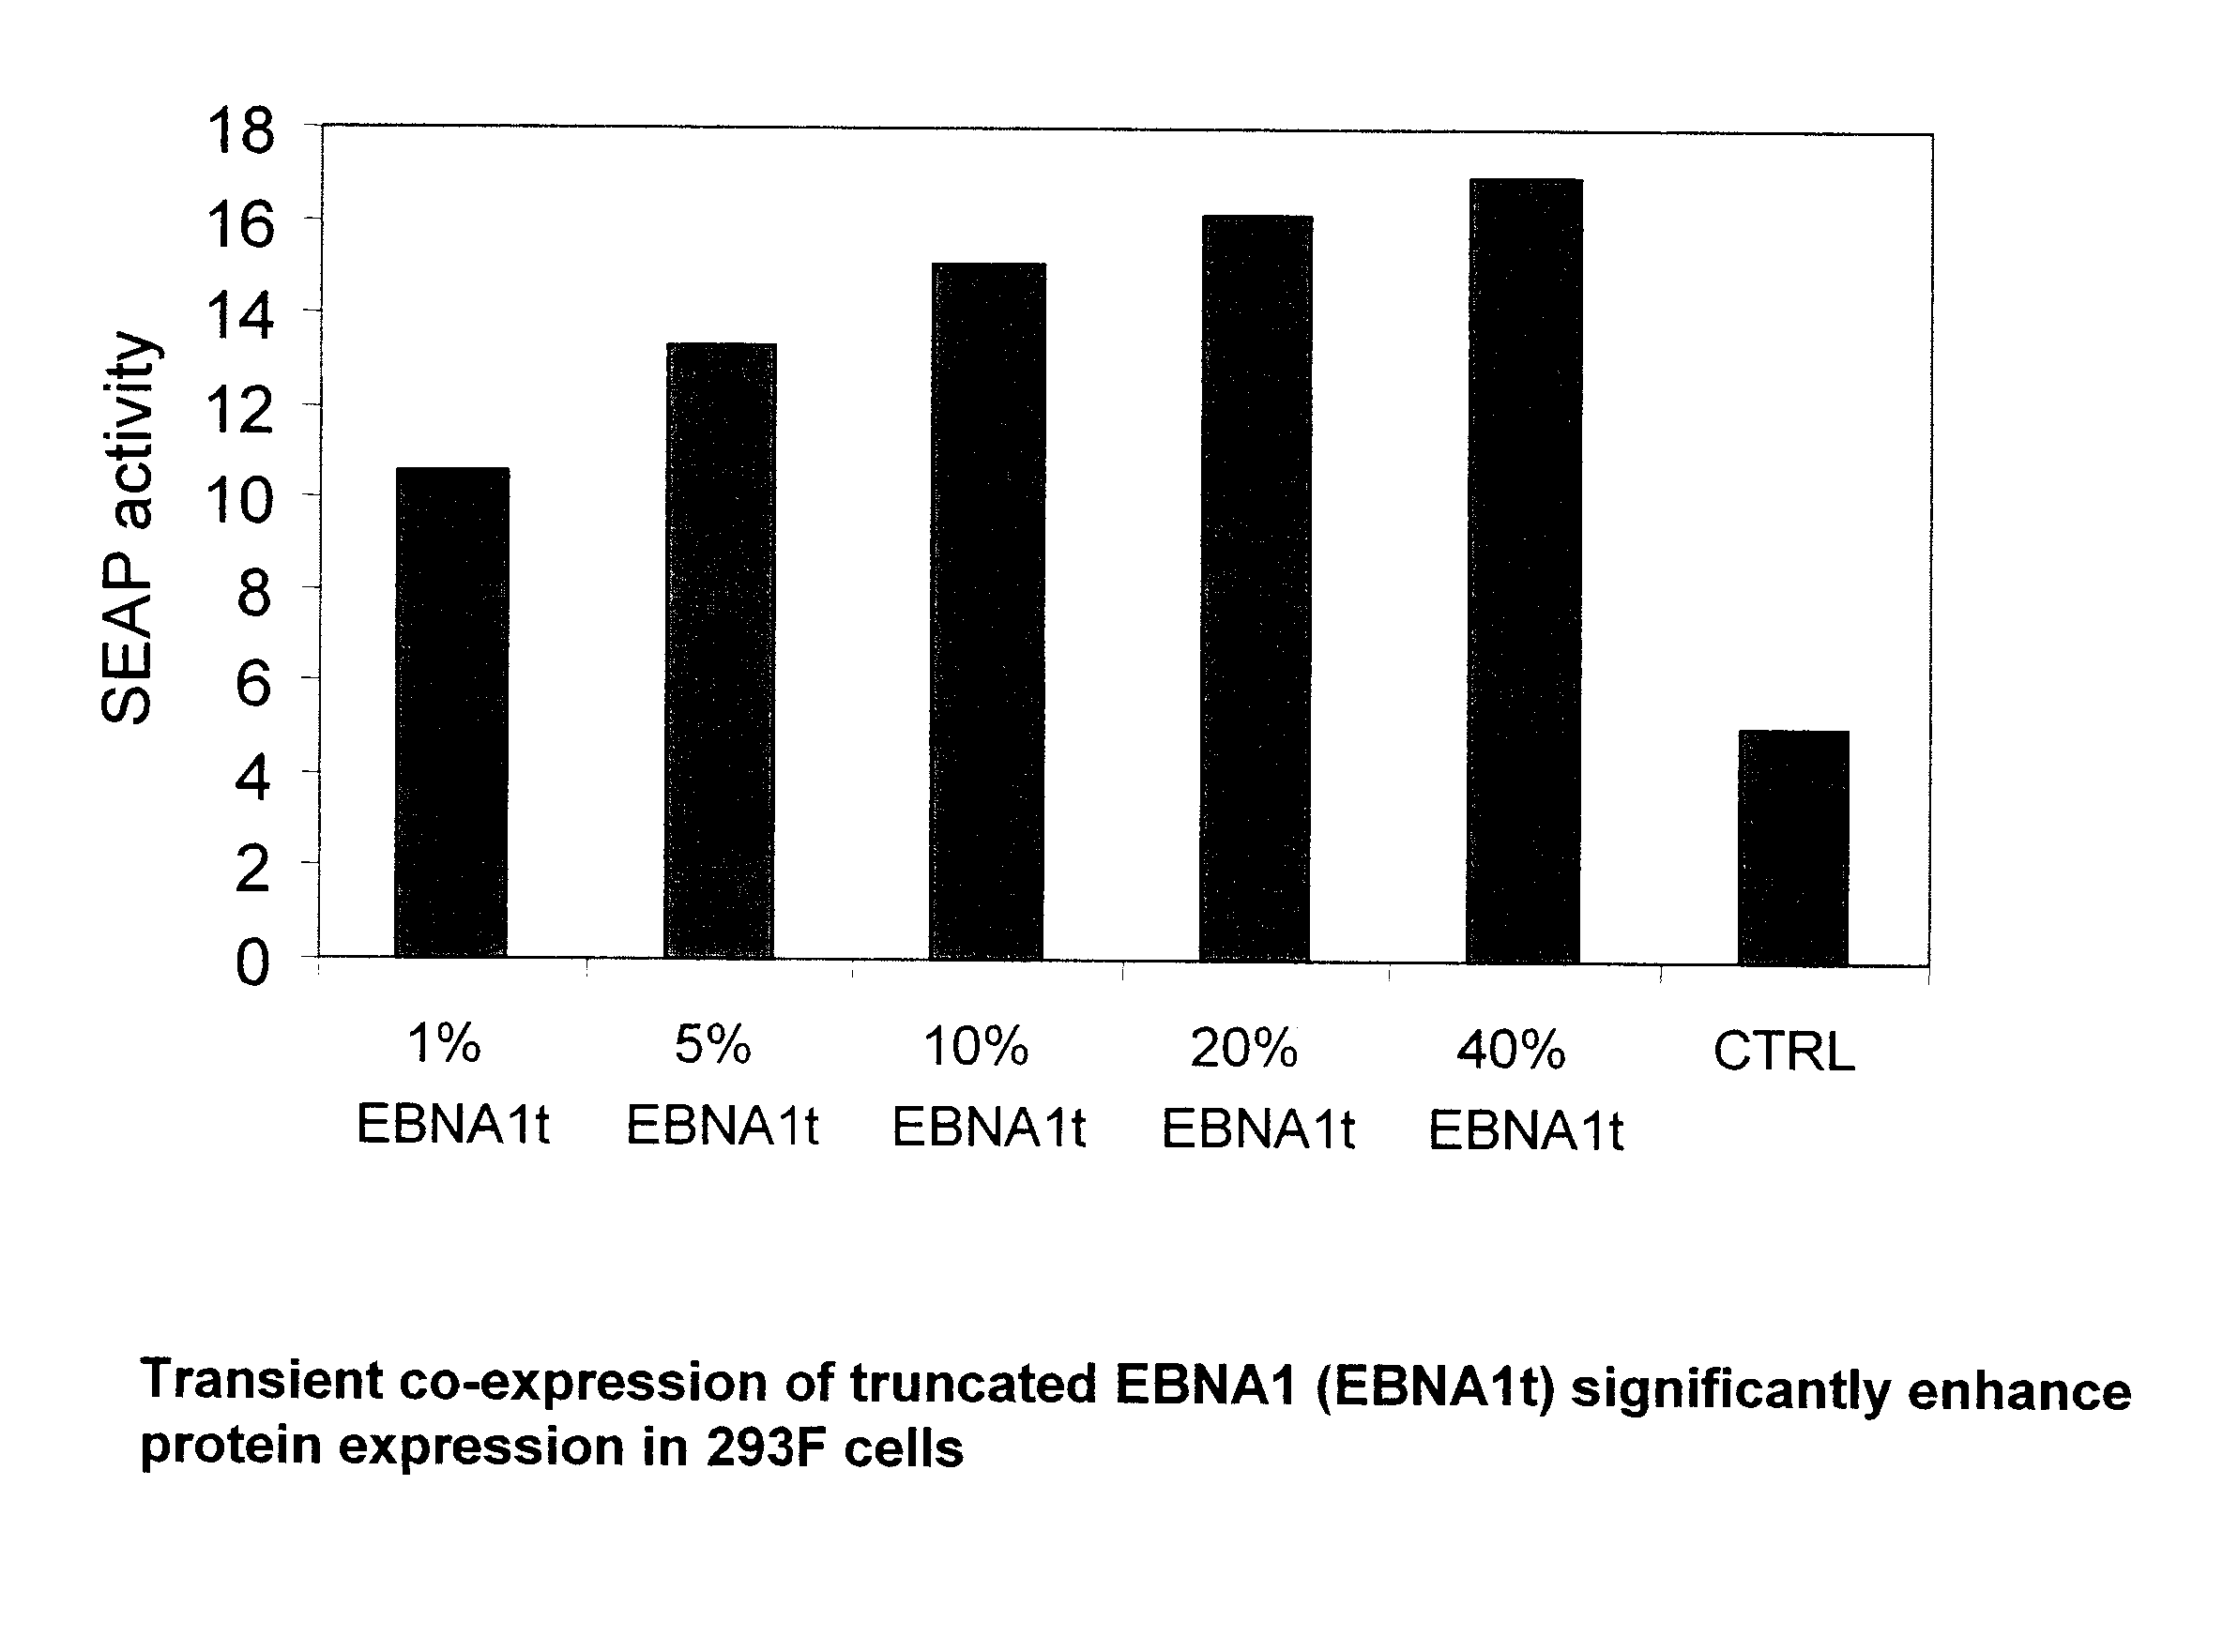 Expression vectors containing a truncated epstein barr nuclear antigen 1 lacking the Gly-Gly-Ala domain for enhanced transient gene expression